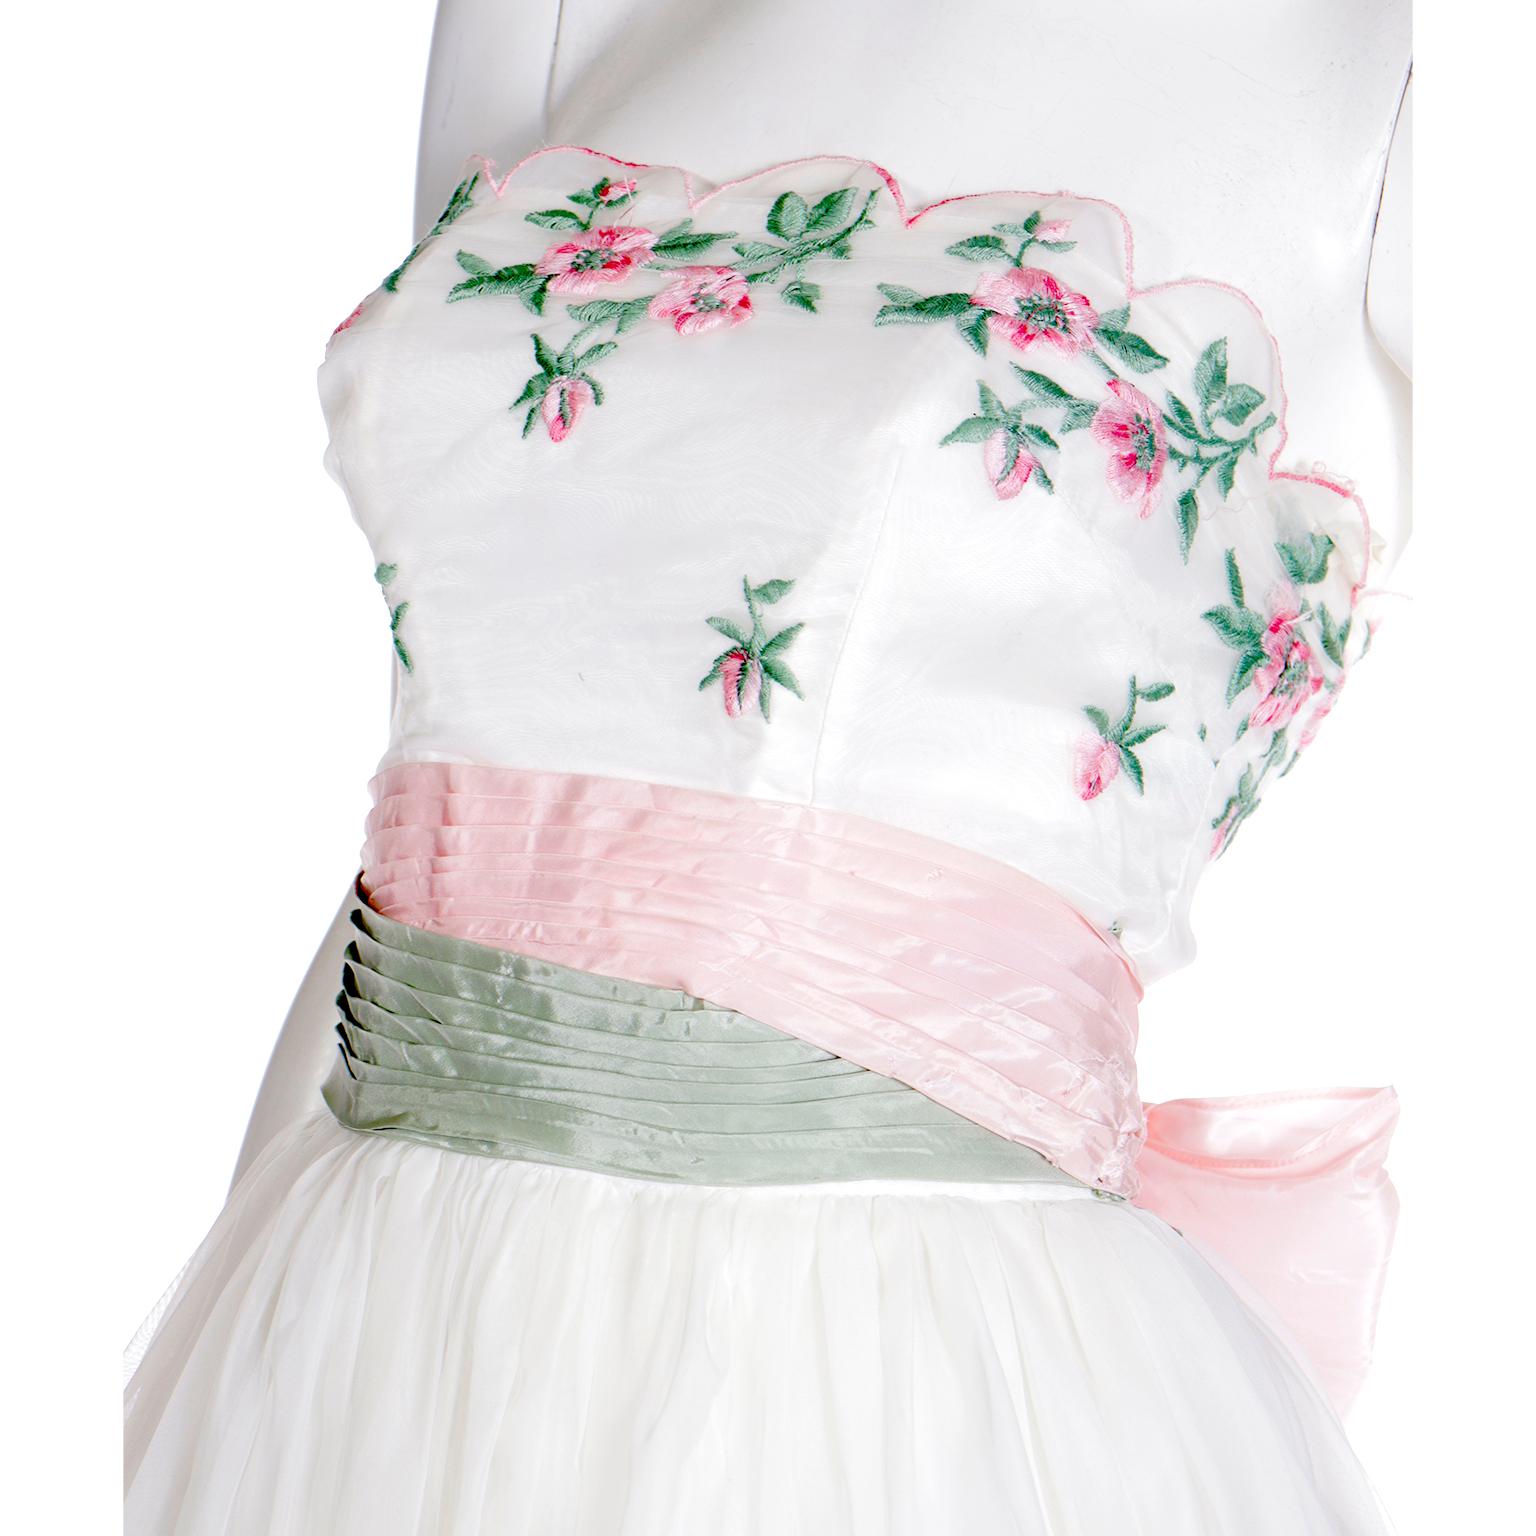 Emma Domb 1950's White Party Dress w Pink and Green Embroidered Flowers For Sale 2